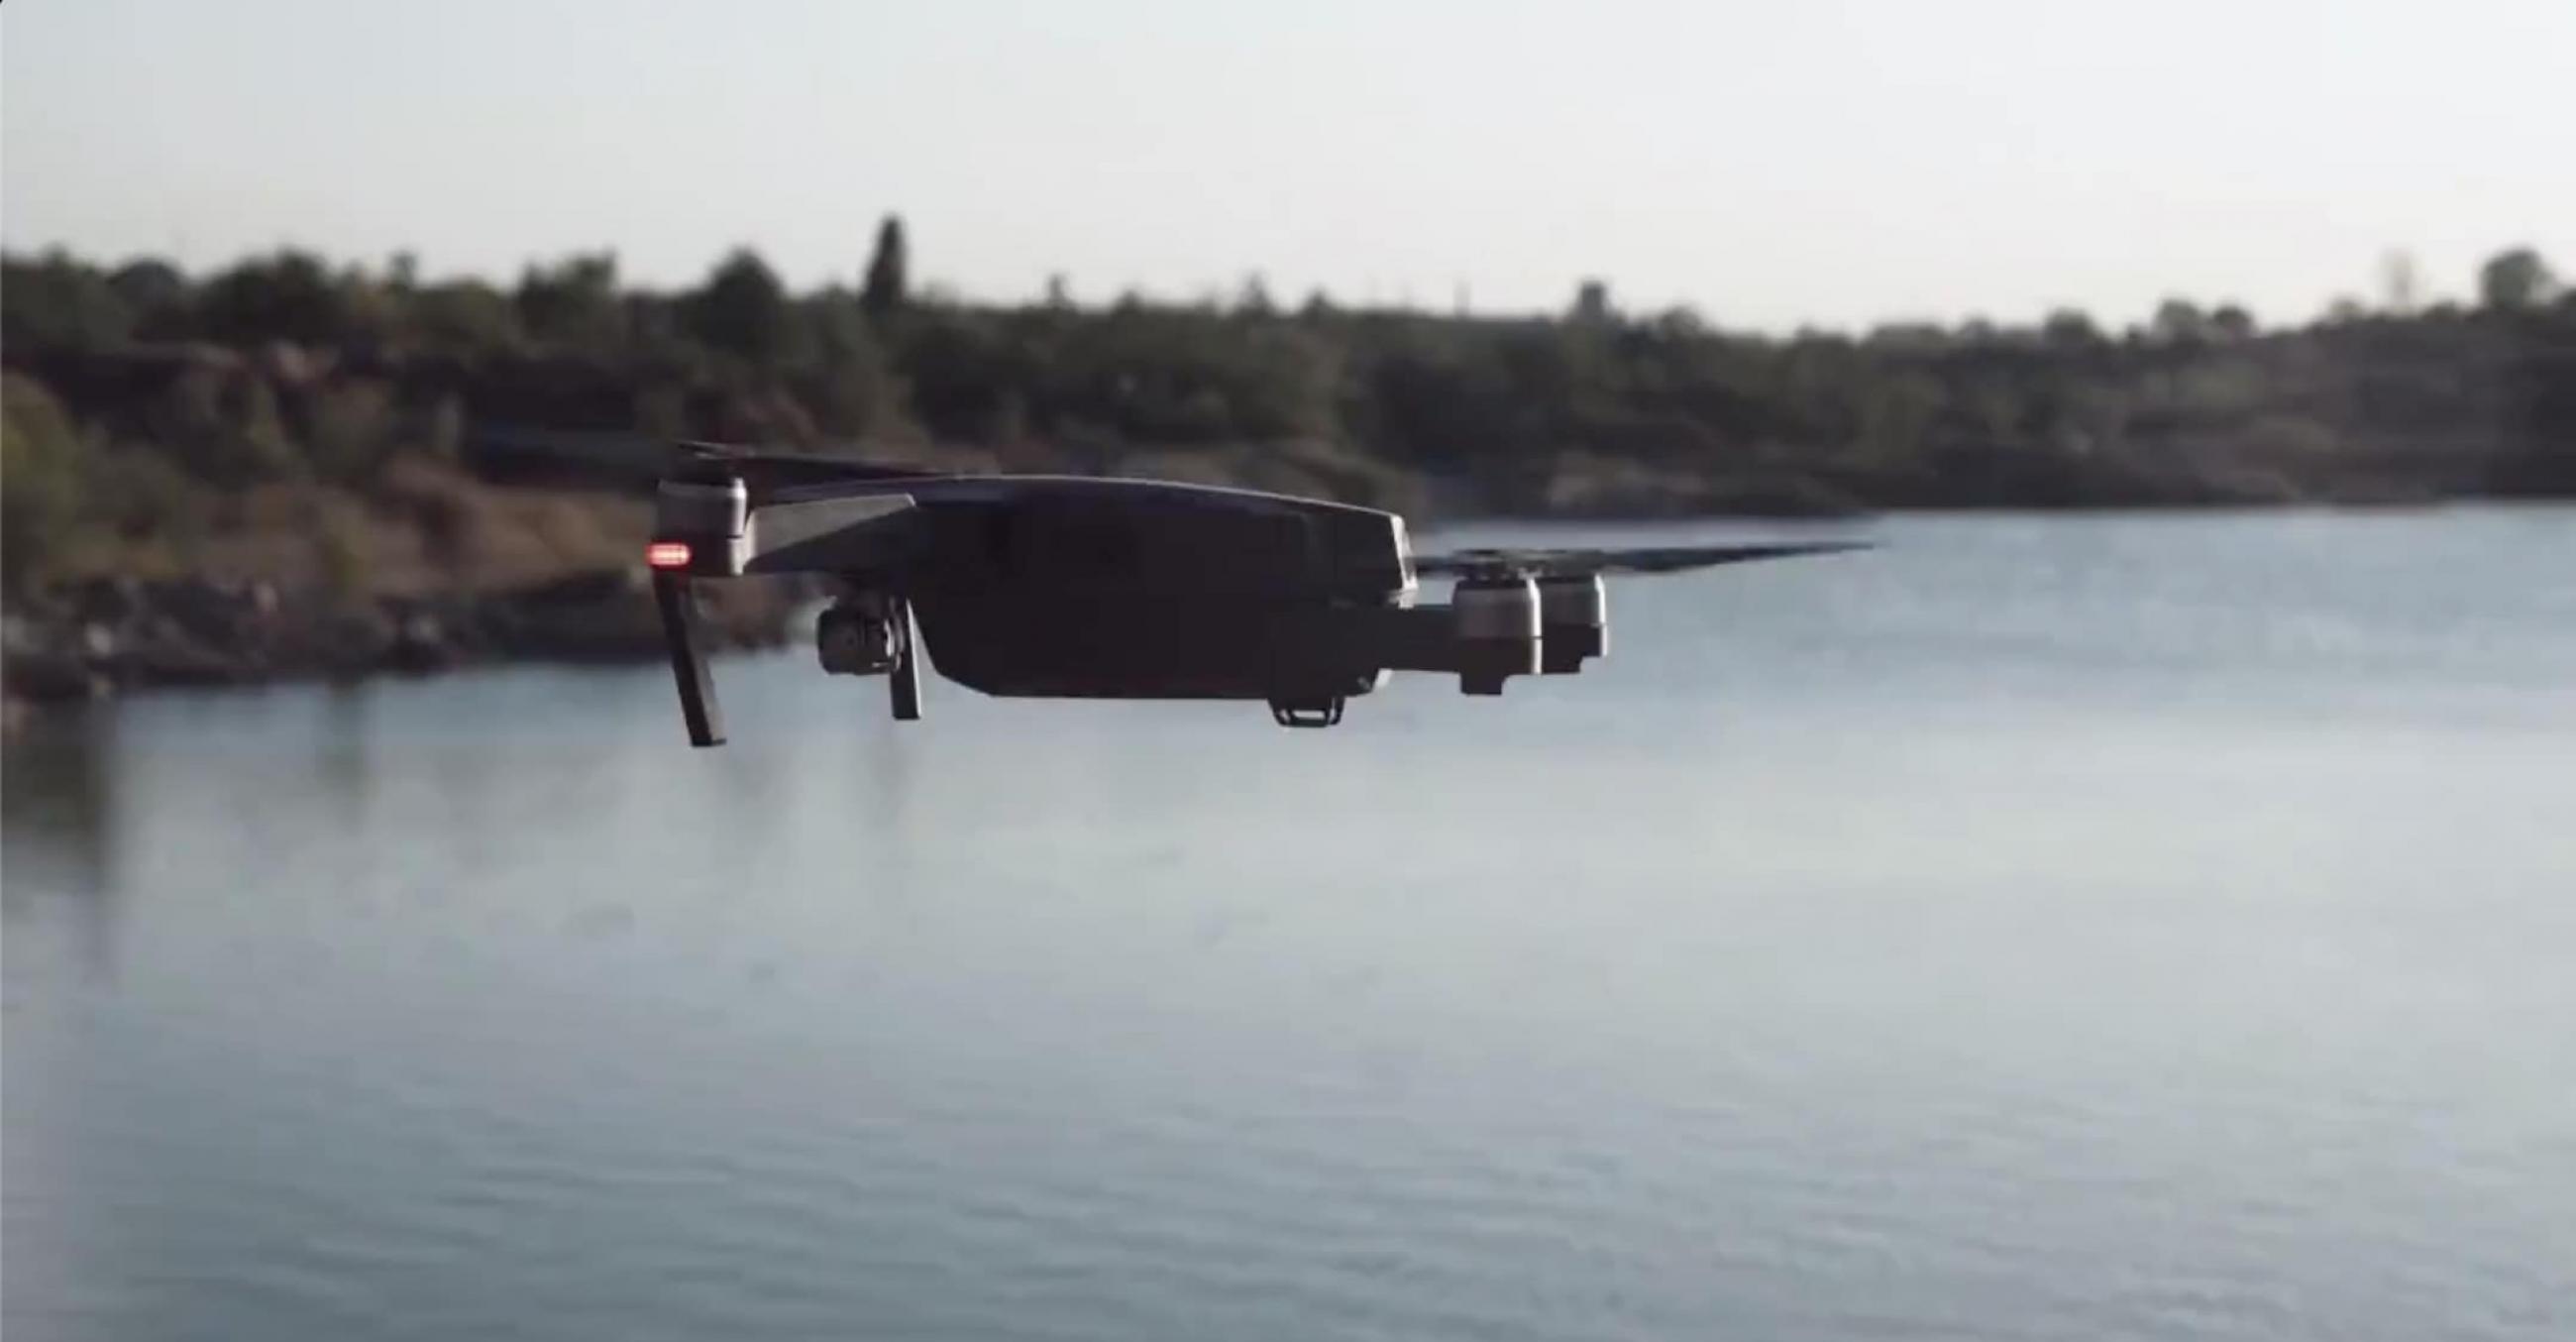 "Drone flying over a lake"